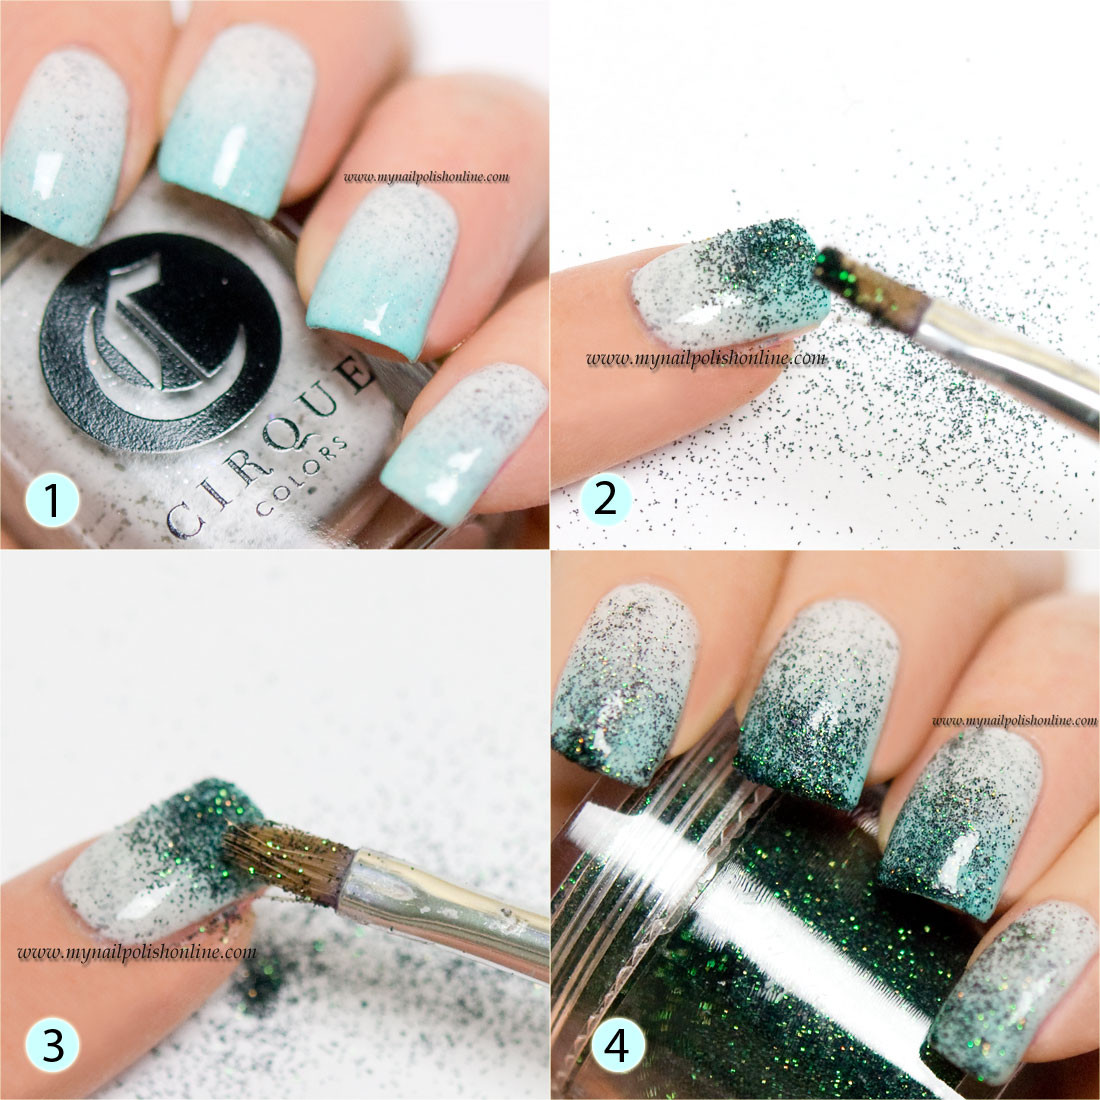 Loose Glitter Nails
 Loose glitter guide a tutorial for loose glitter